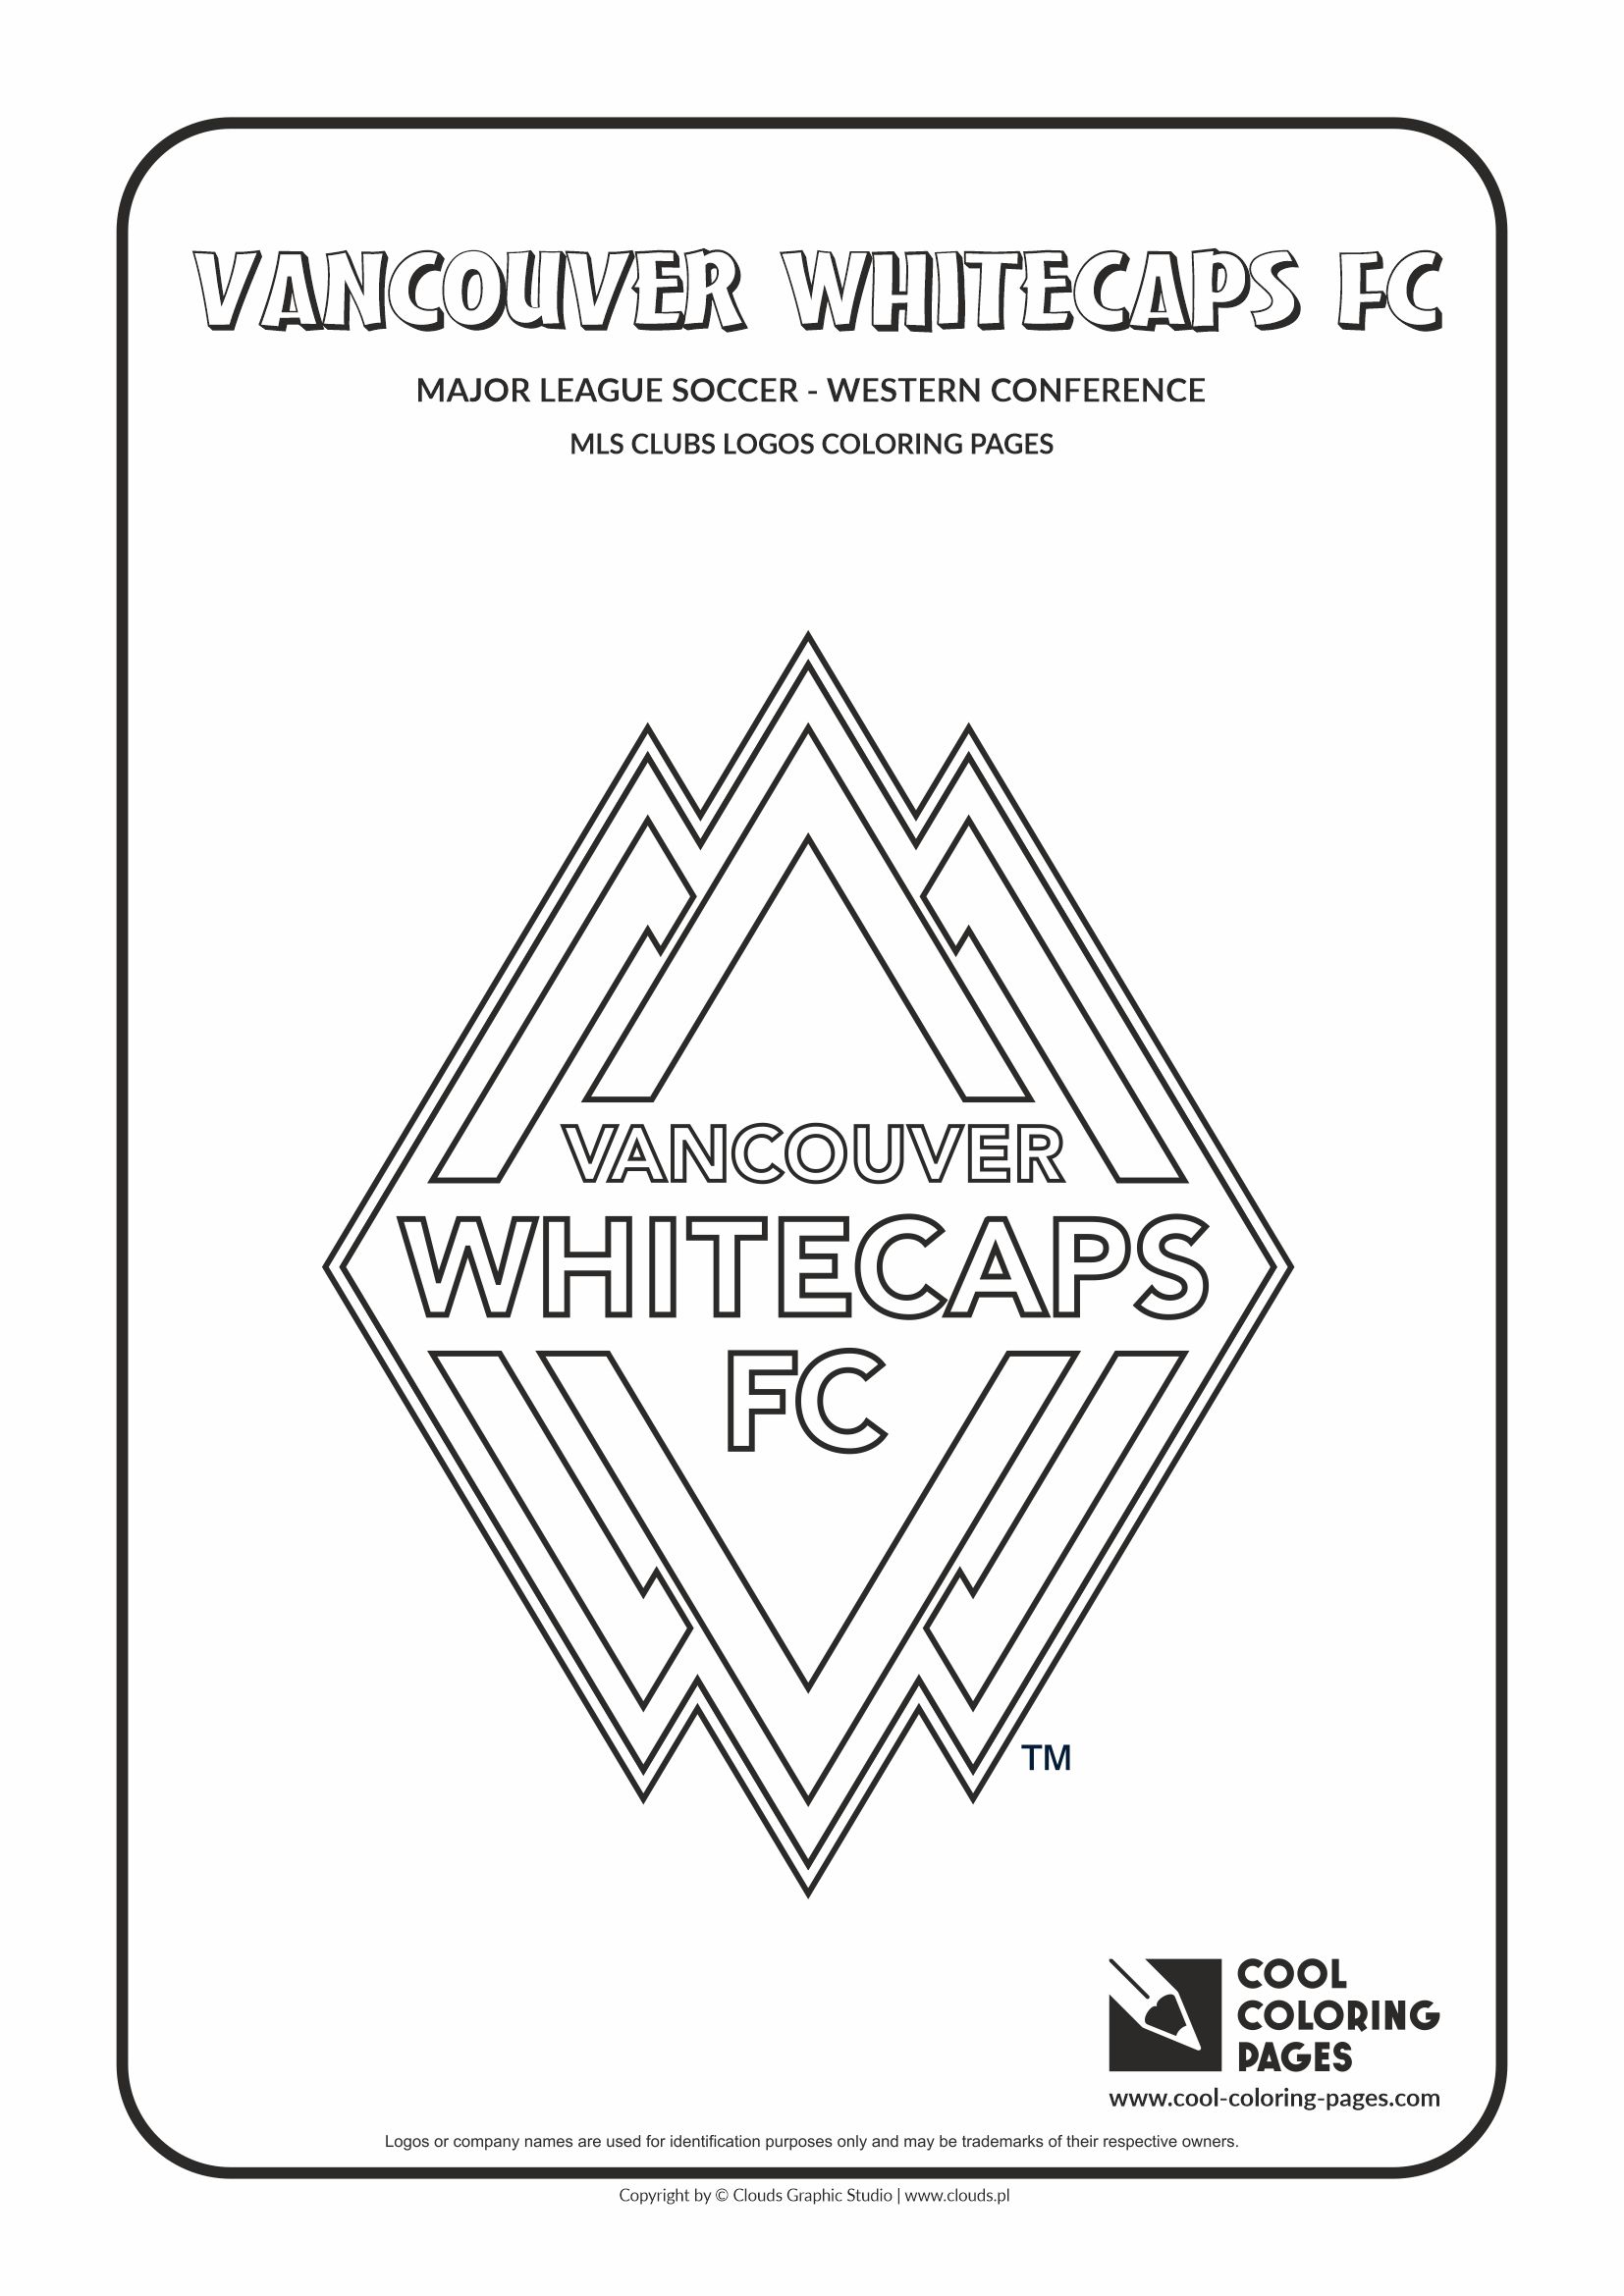 Cool Coloring Pages – MLS clubs logos - Vancouver Whitecaps FC